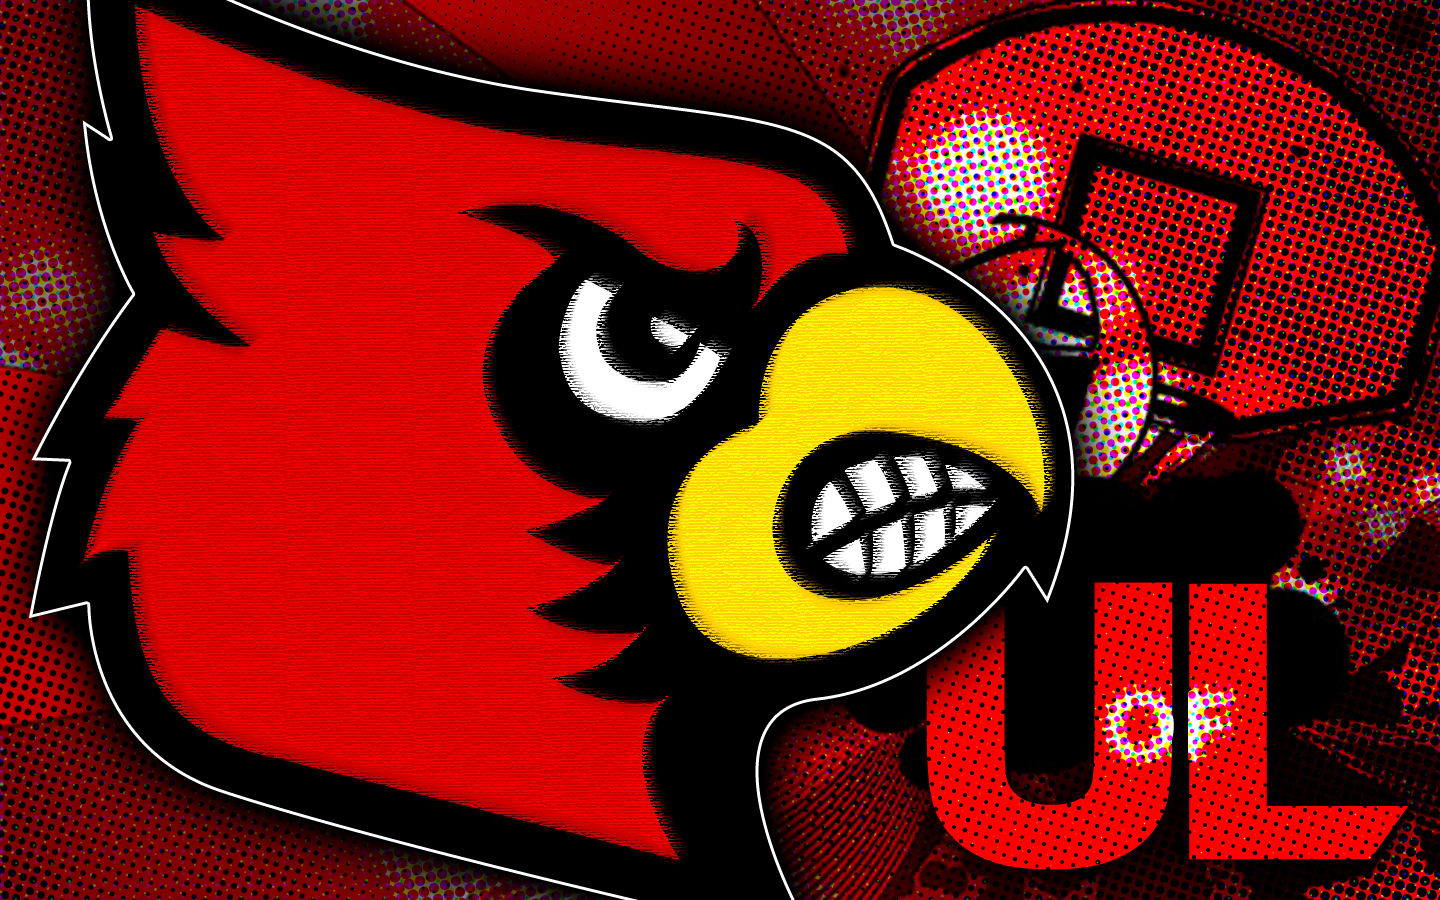 Louisville Cardinals by BrianAnthony2010 on